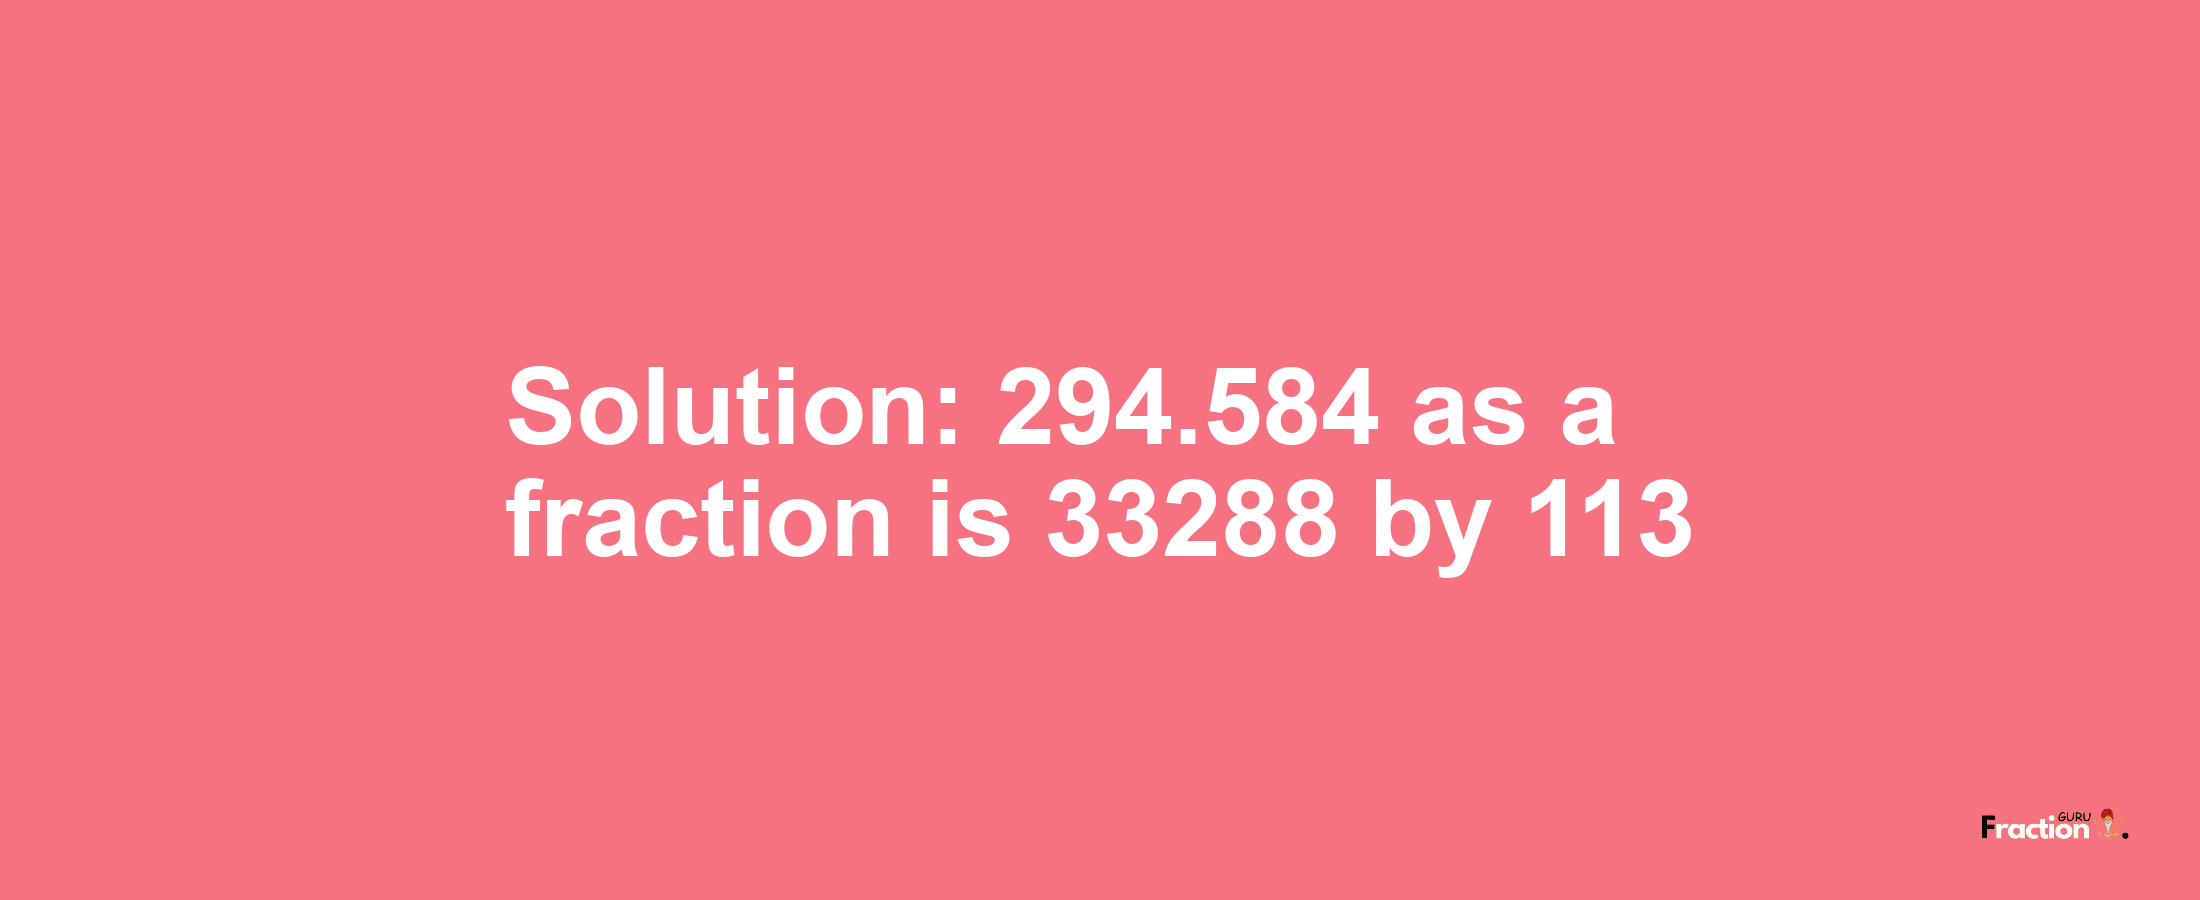 Solution:294.584 as a fraction is 33288/113